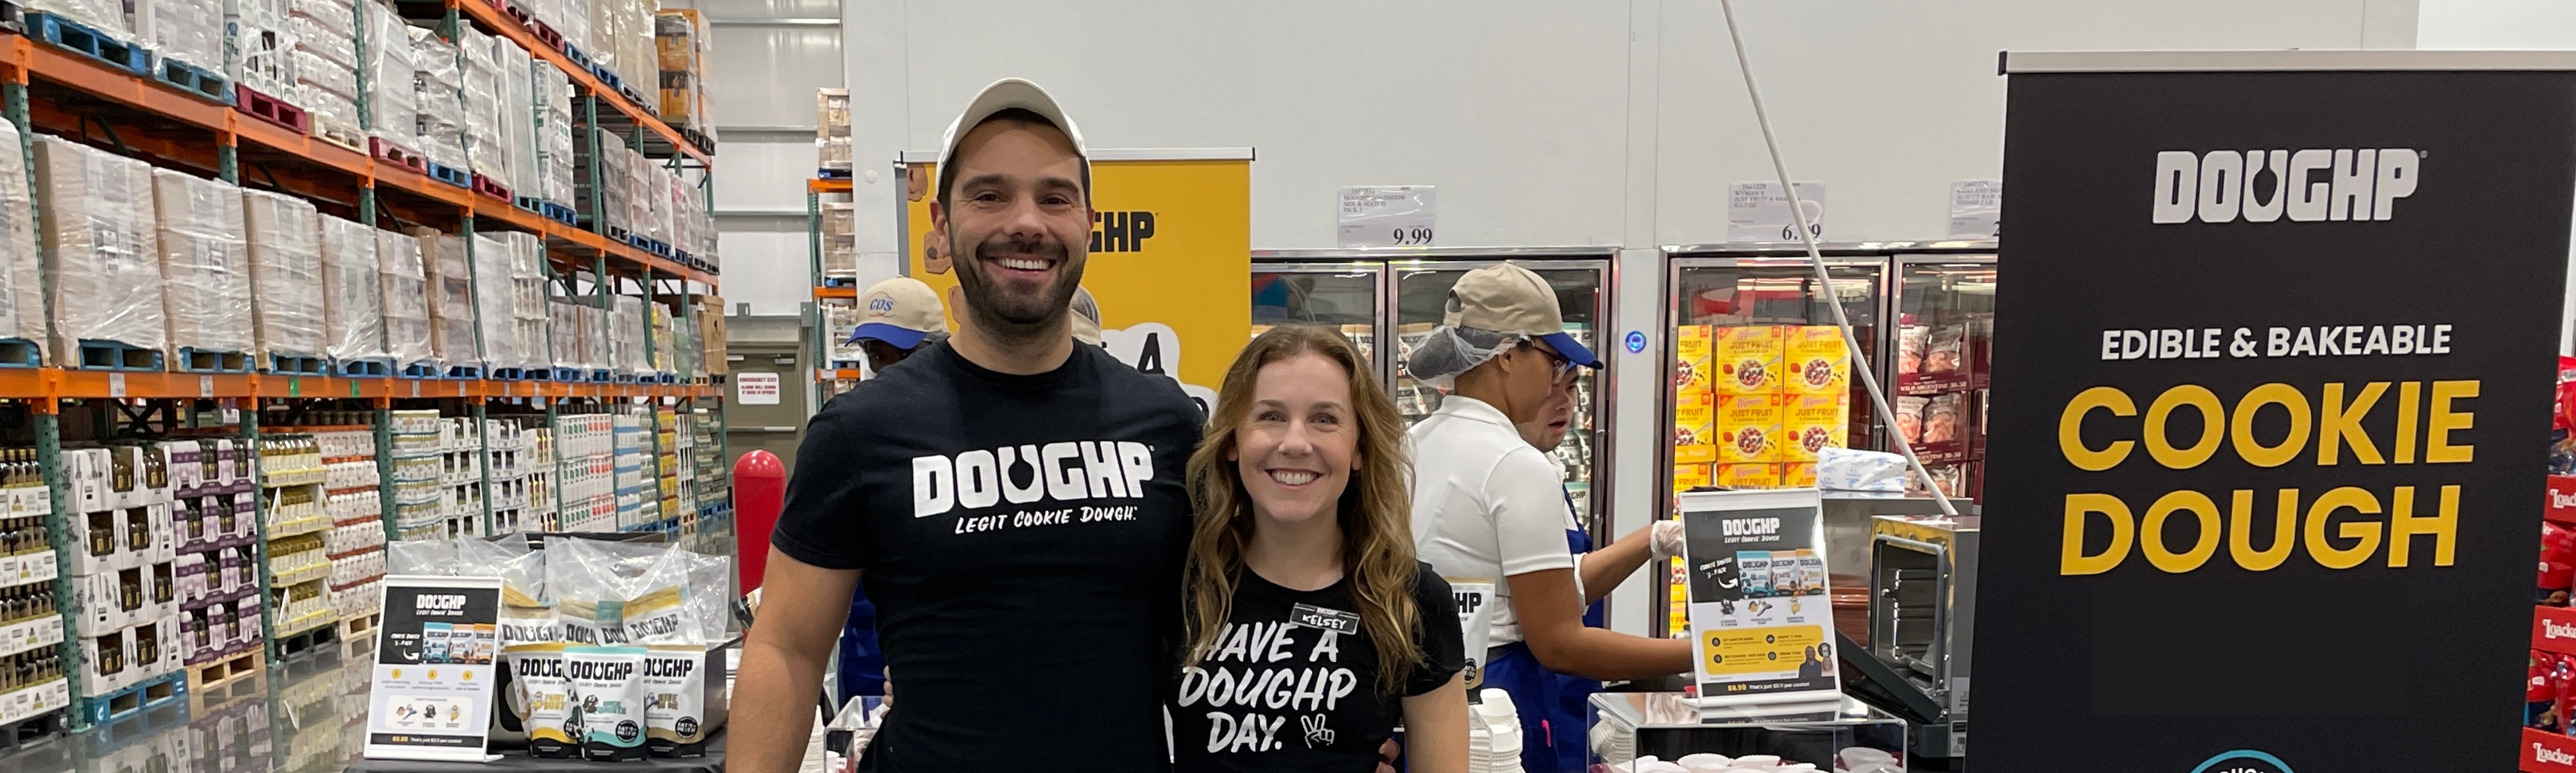 PRESS RELEASE: America's Beloved Cookie Dough Brand, Doughp, Announces Exciting Costco Roadshows Across Texas